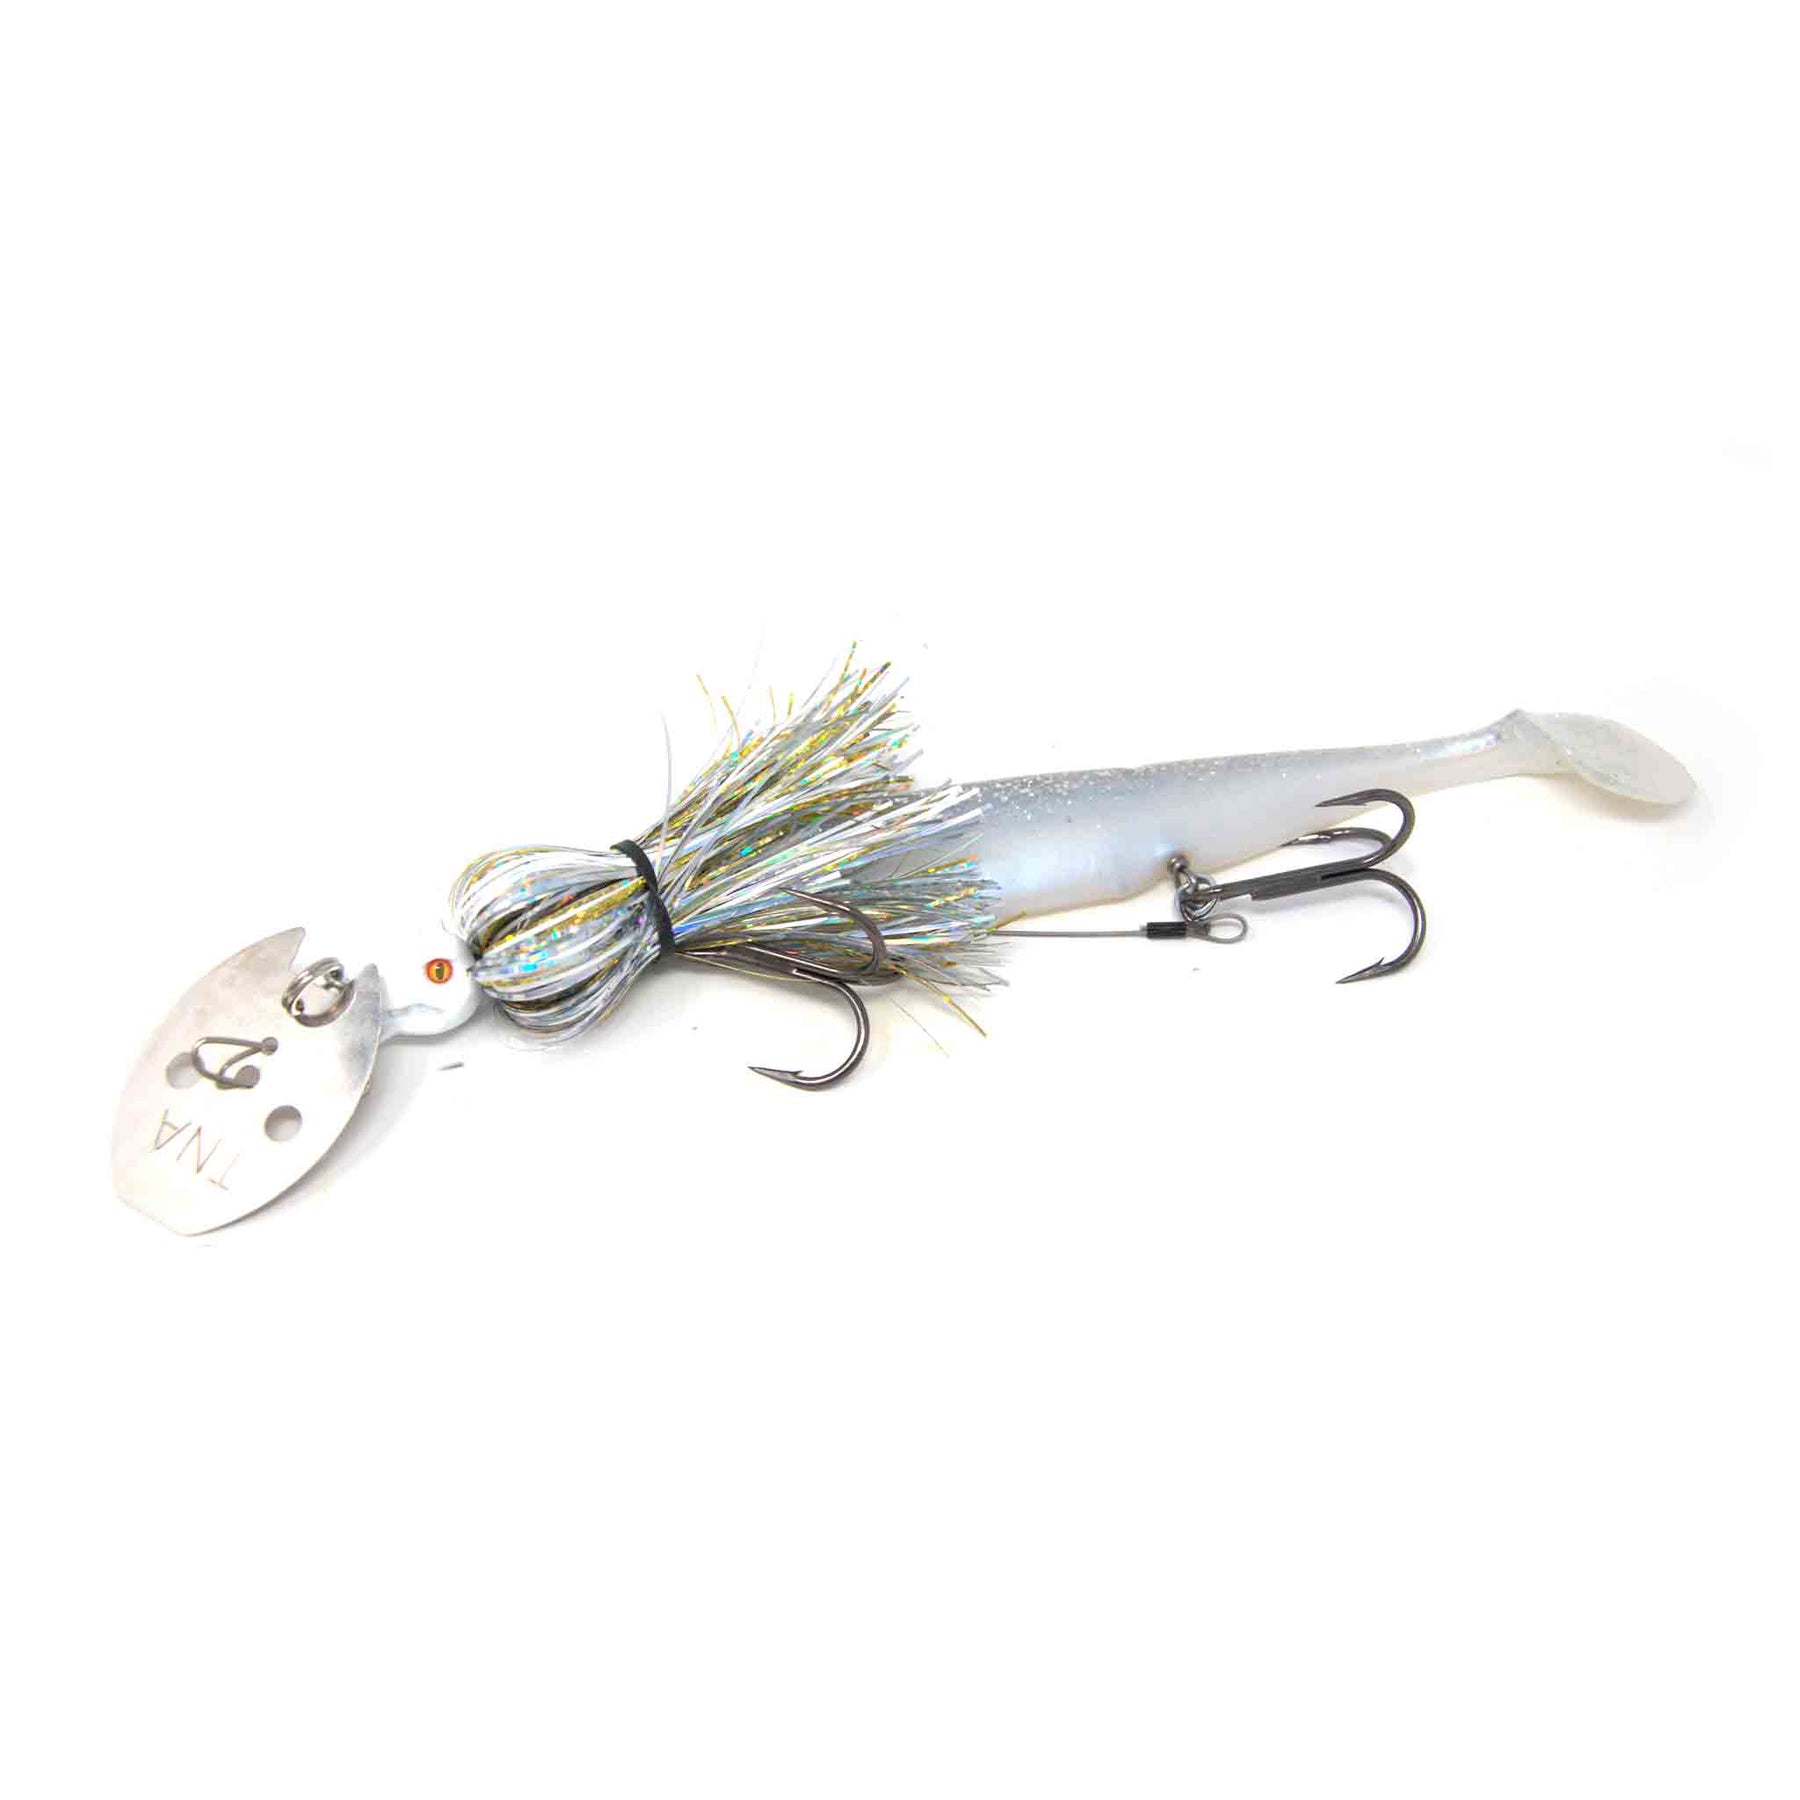 View of Chatterbaits TnA Tackle Waggin Dragon Chatterbait Sparkling Mermaid available at EZOKO Pike and Musky Shop